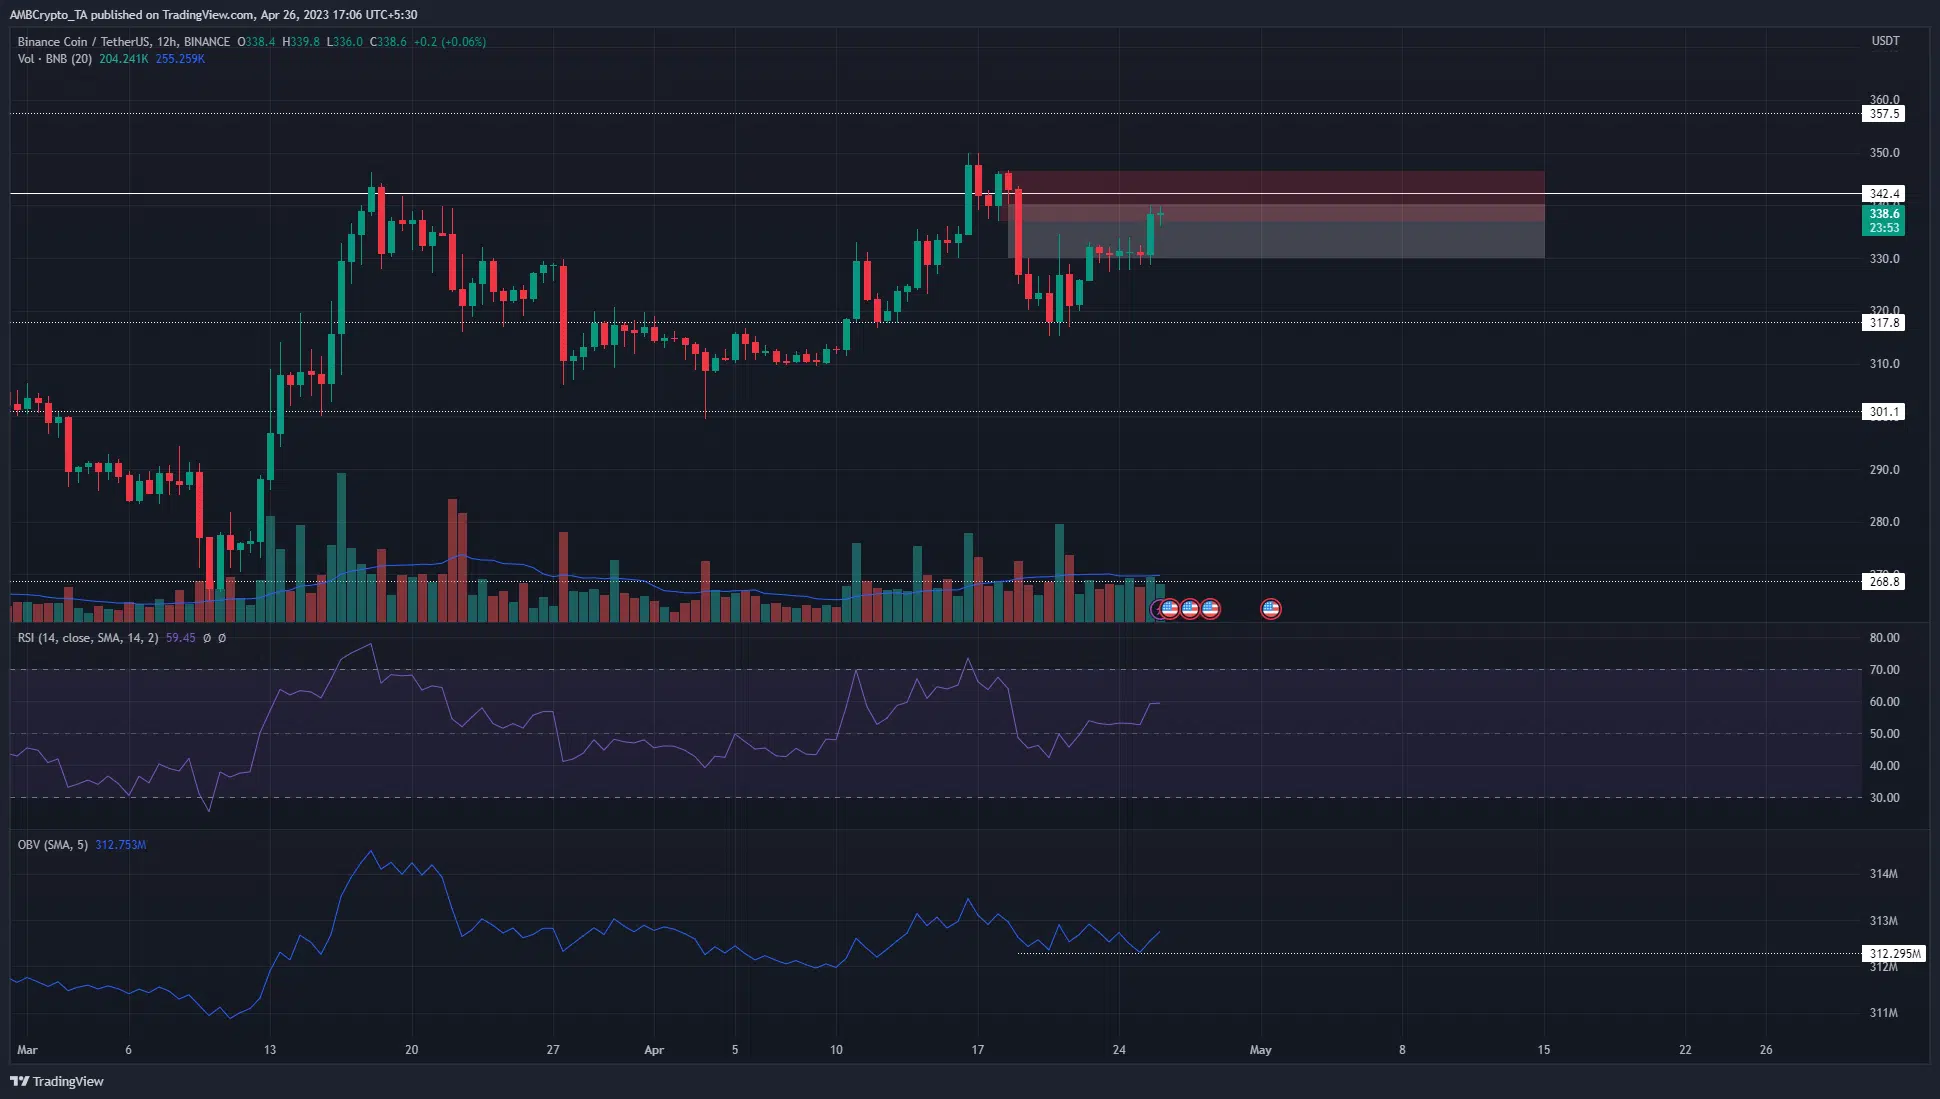 Binance Coin bounces from support zone and could challenge the local highs again